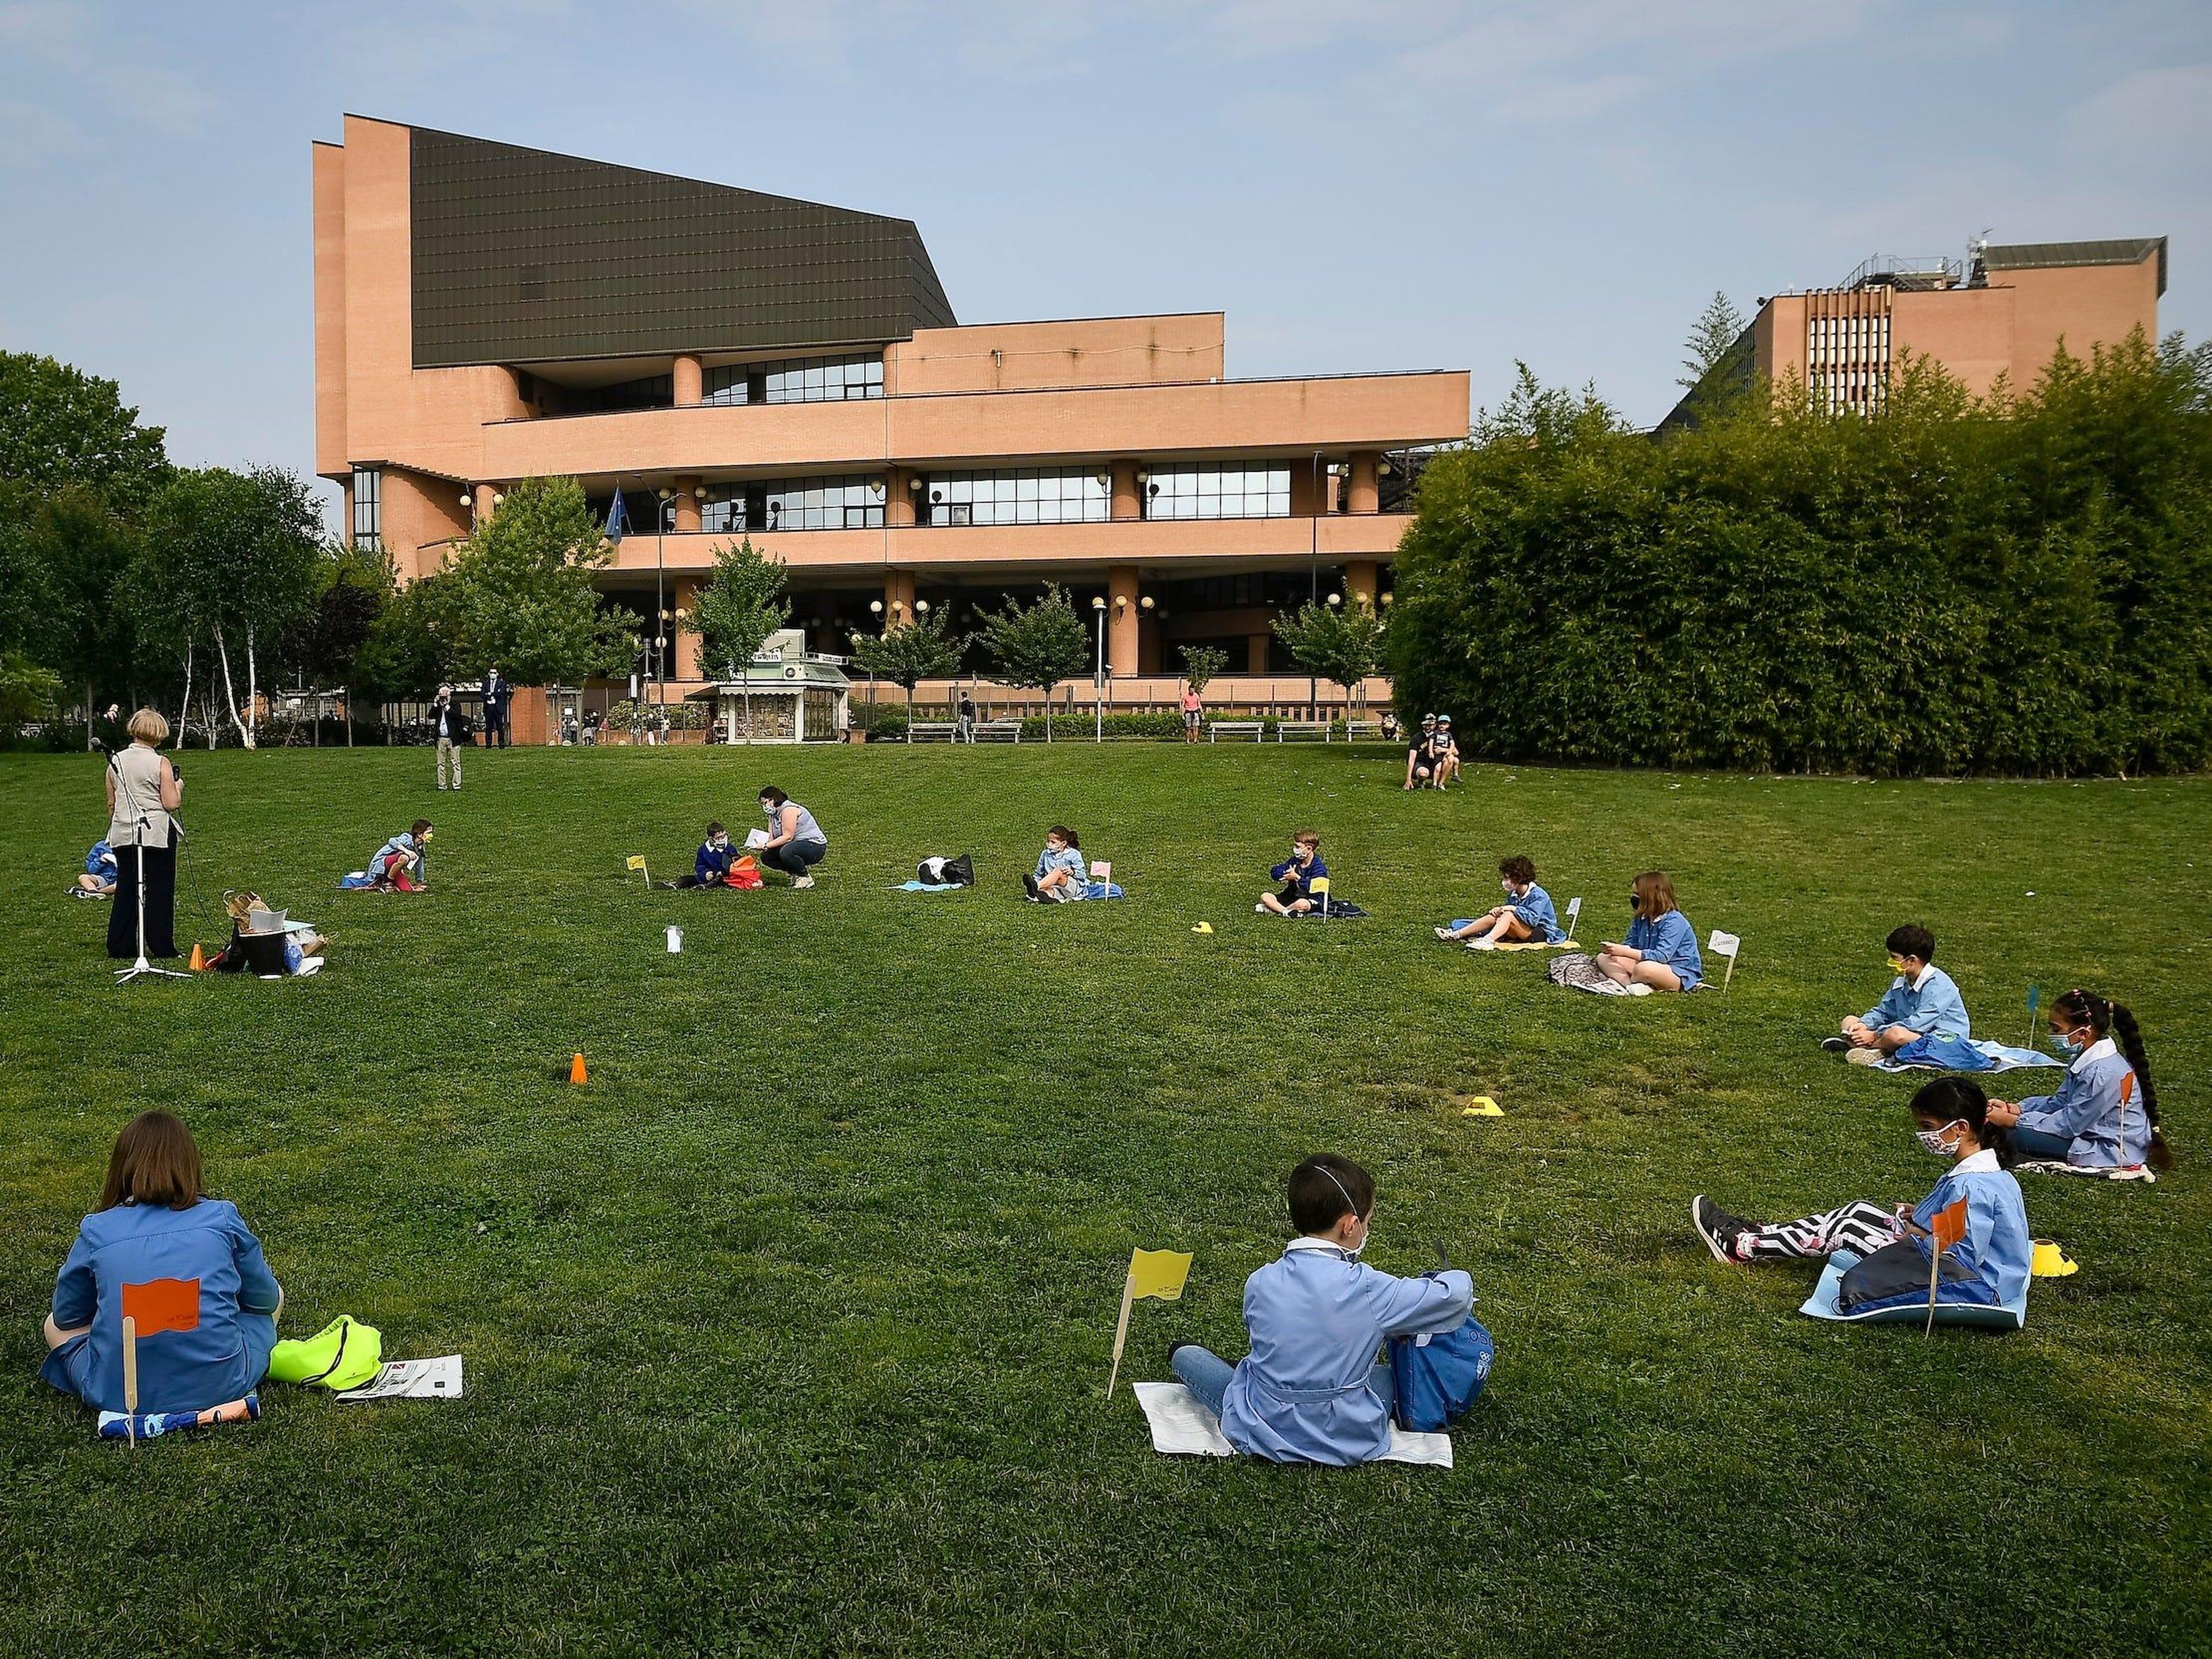 An example of an outdoor class in Turin, Italy, in June 2020.